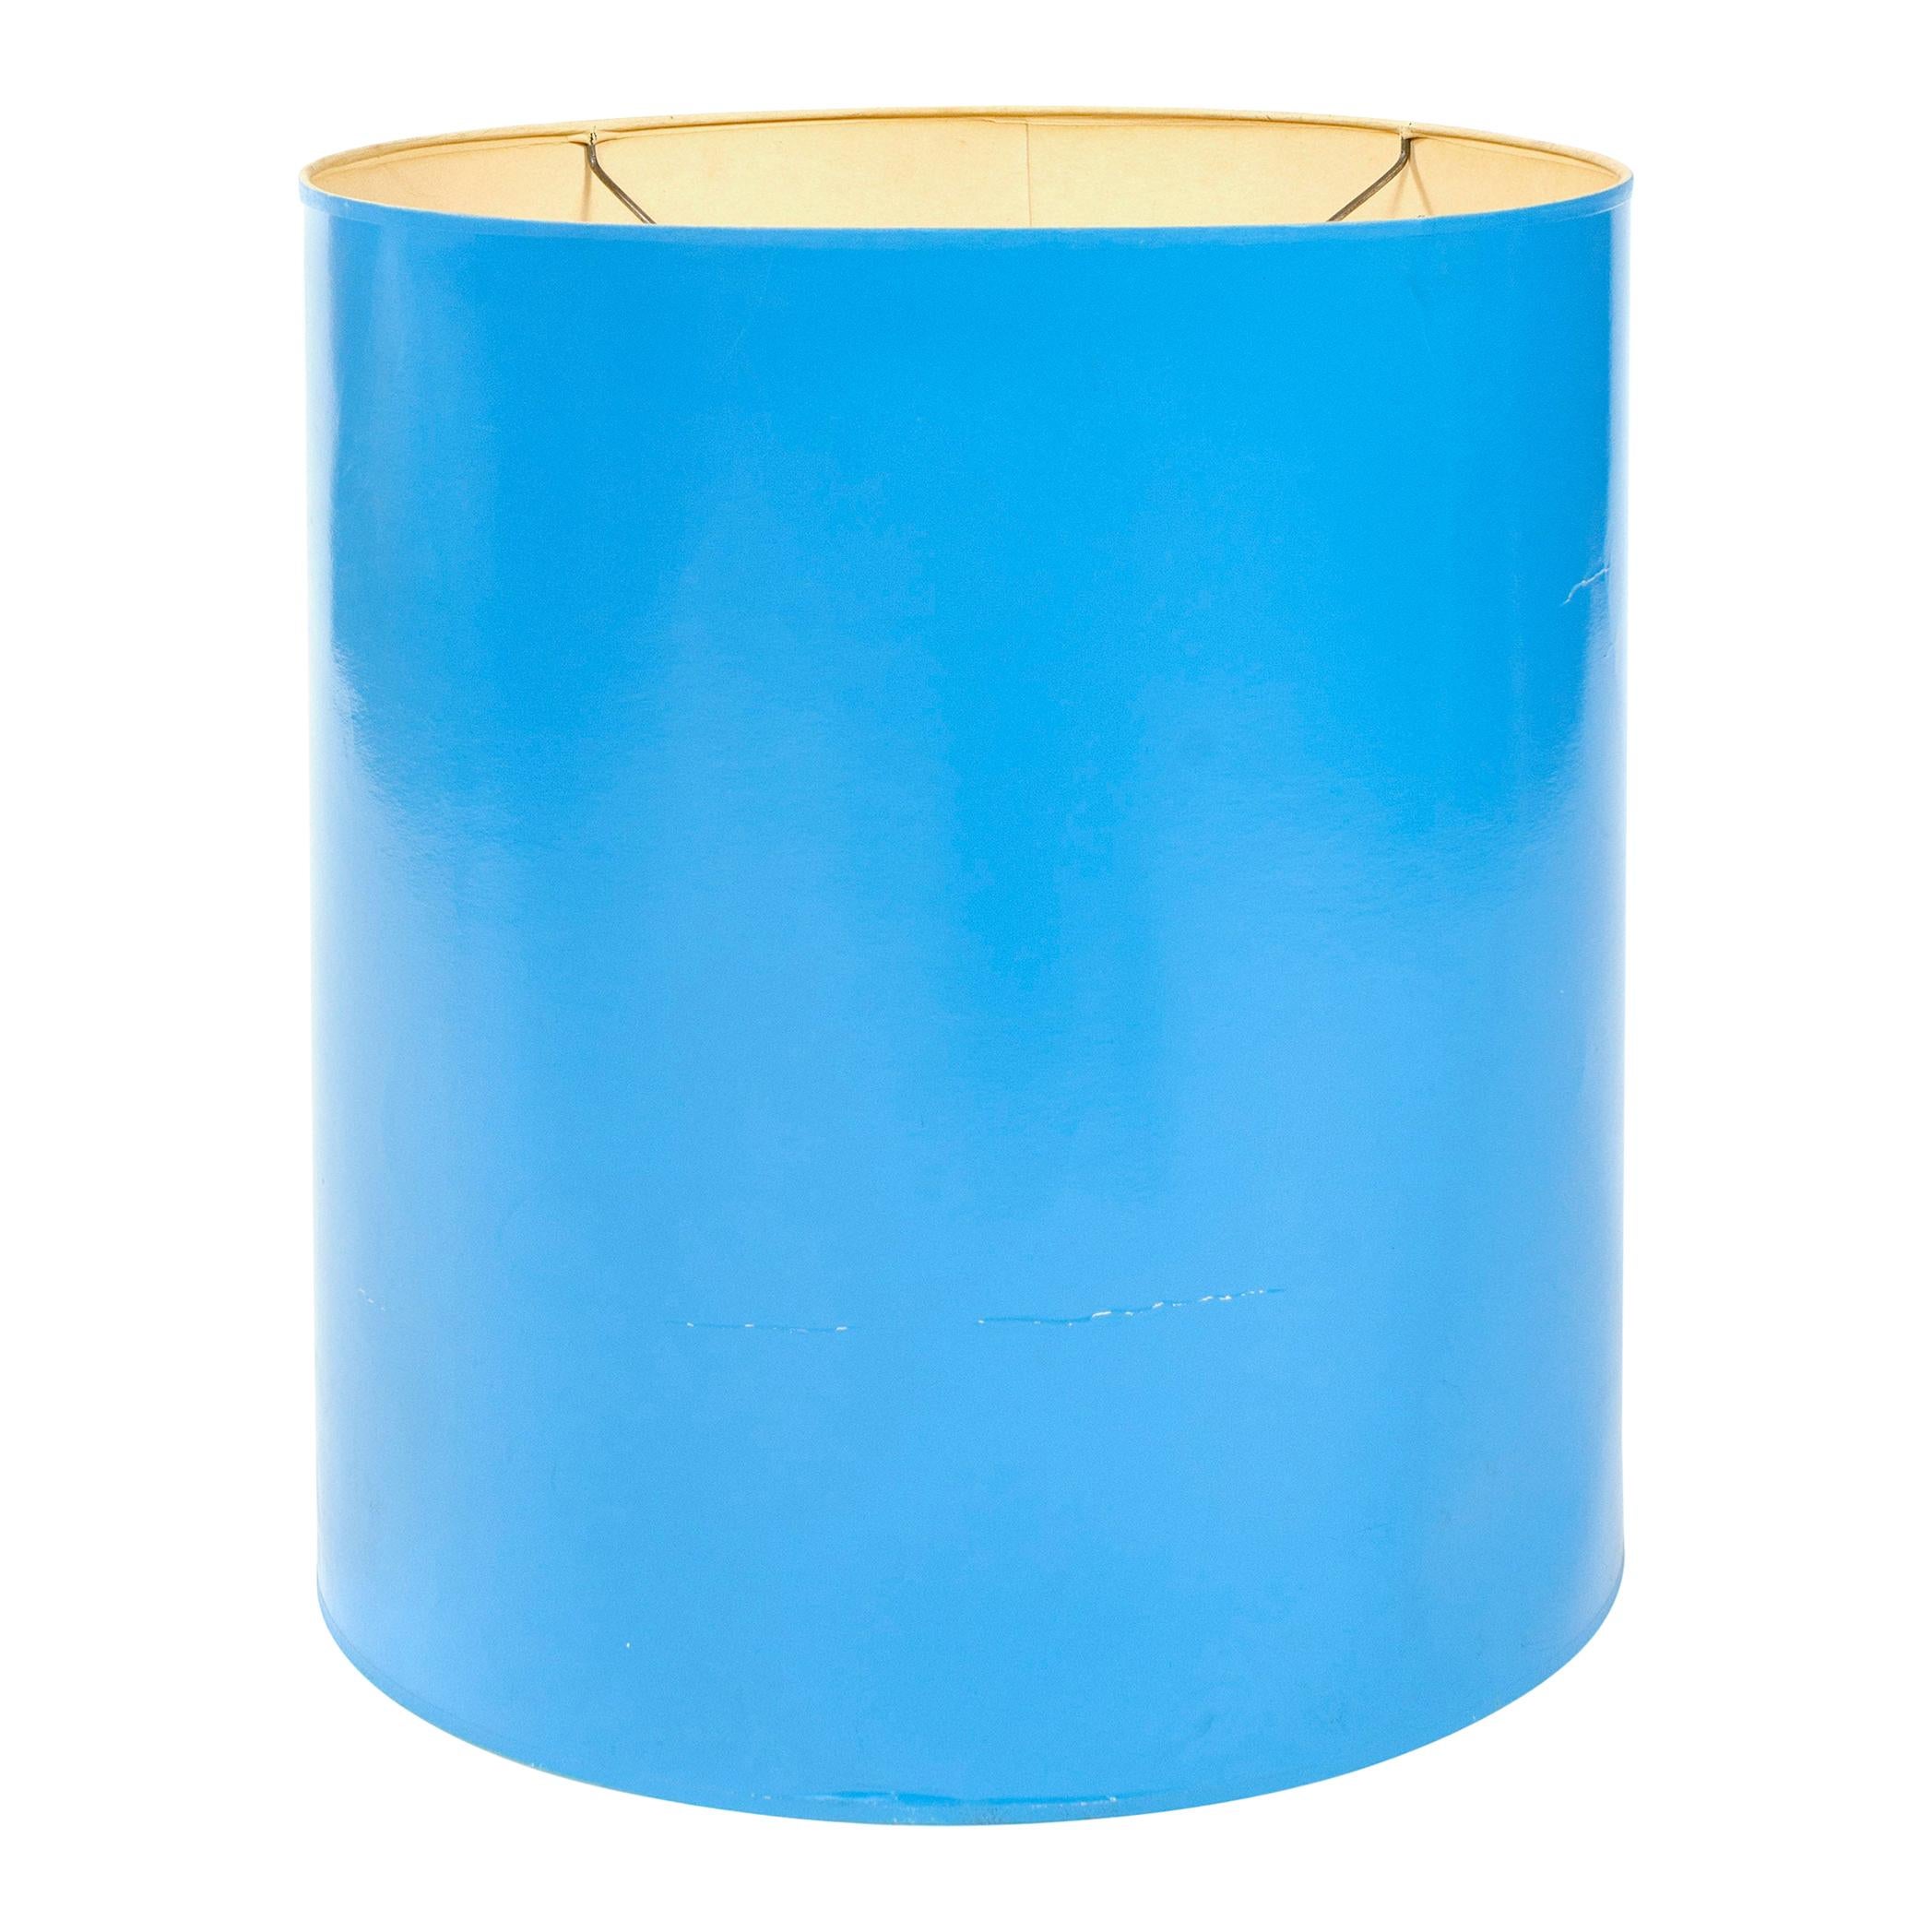 1960s Lacquered Blue Lamp Shade For Sale